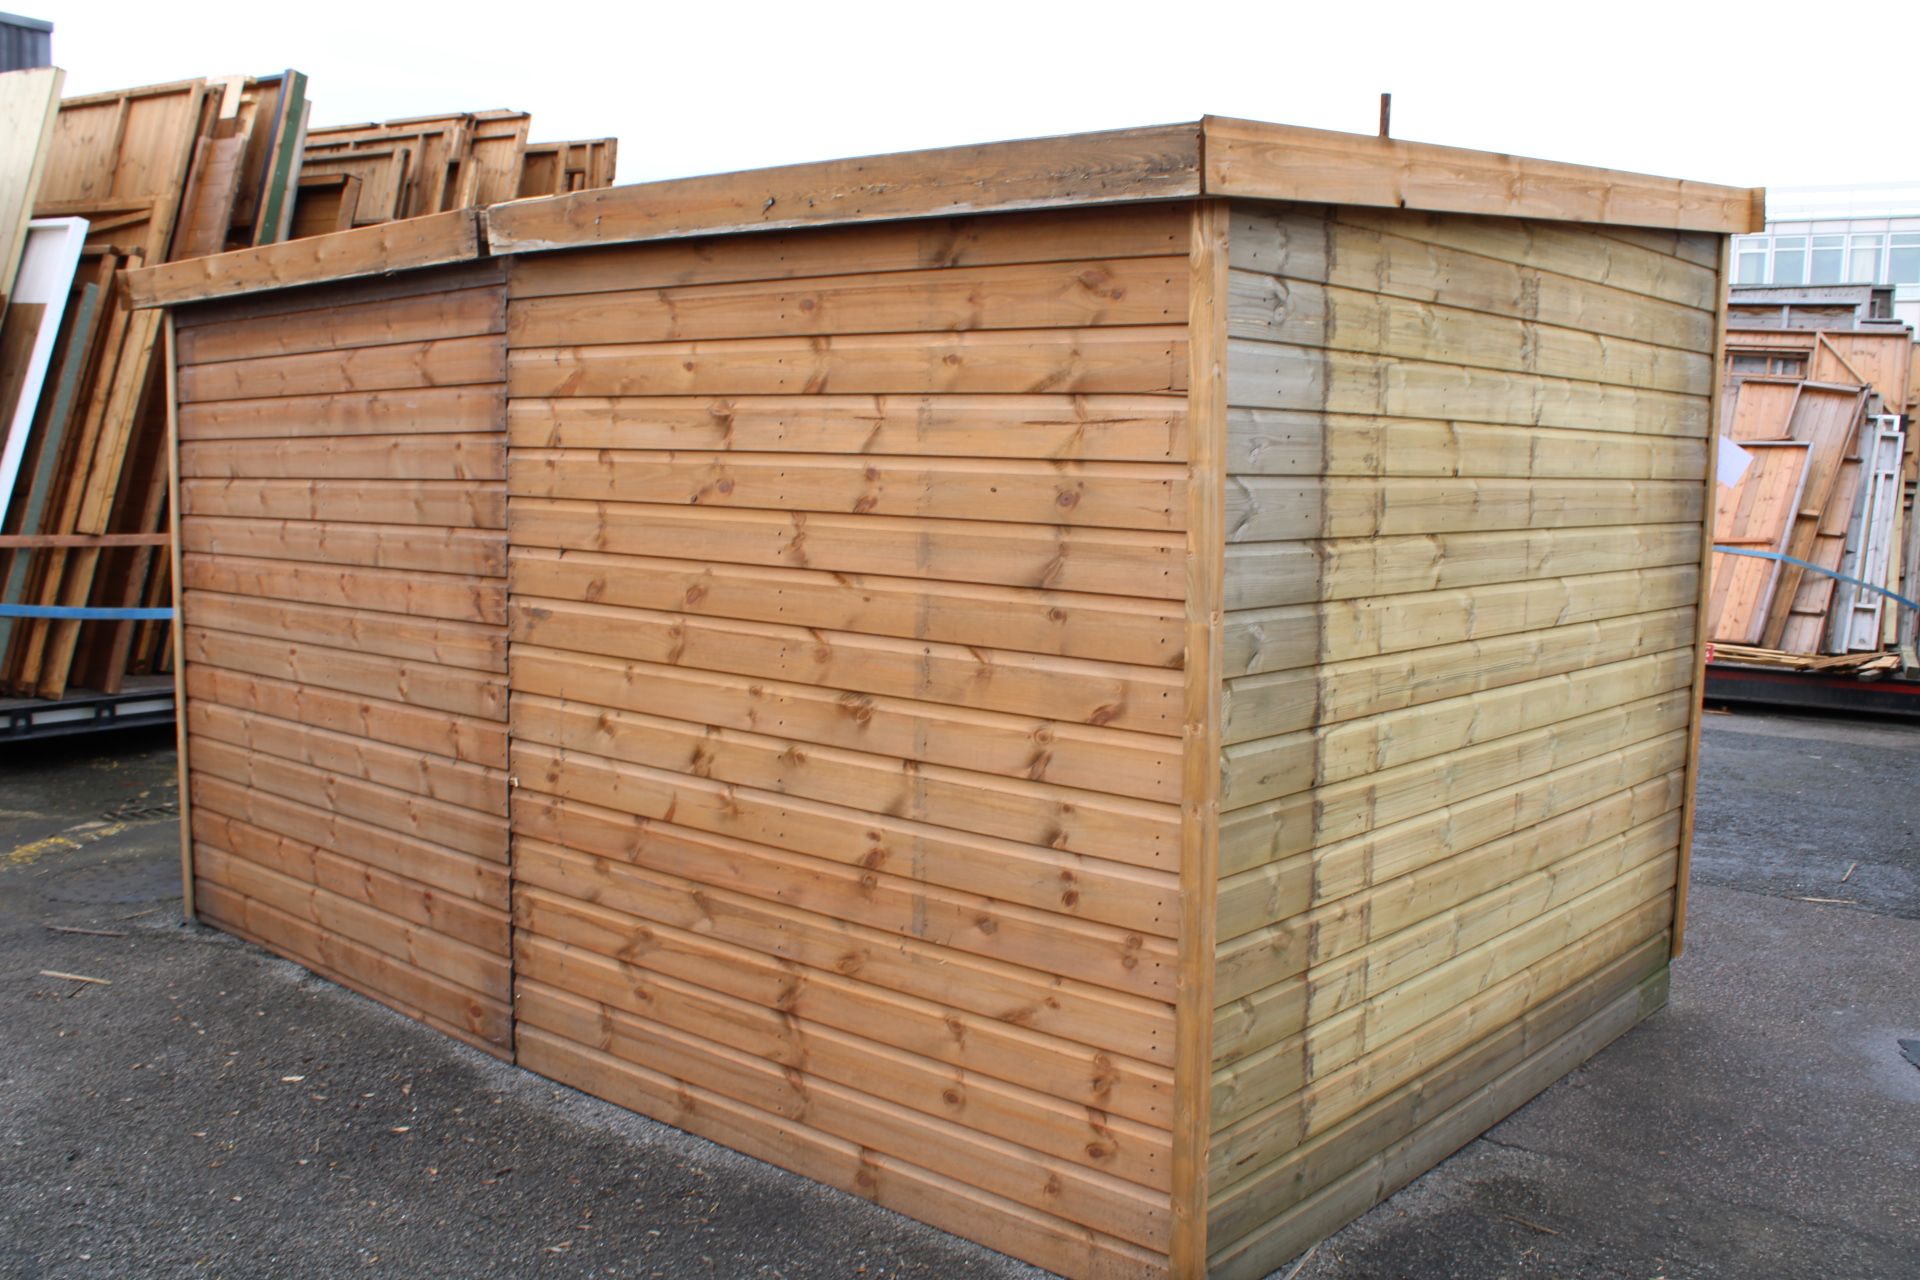 12x8 superior height pent shed, Standard 16mm Nominal Cladding - Image 2 of 5